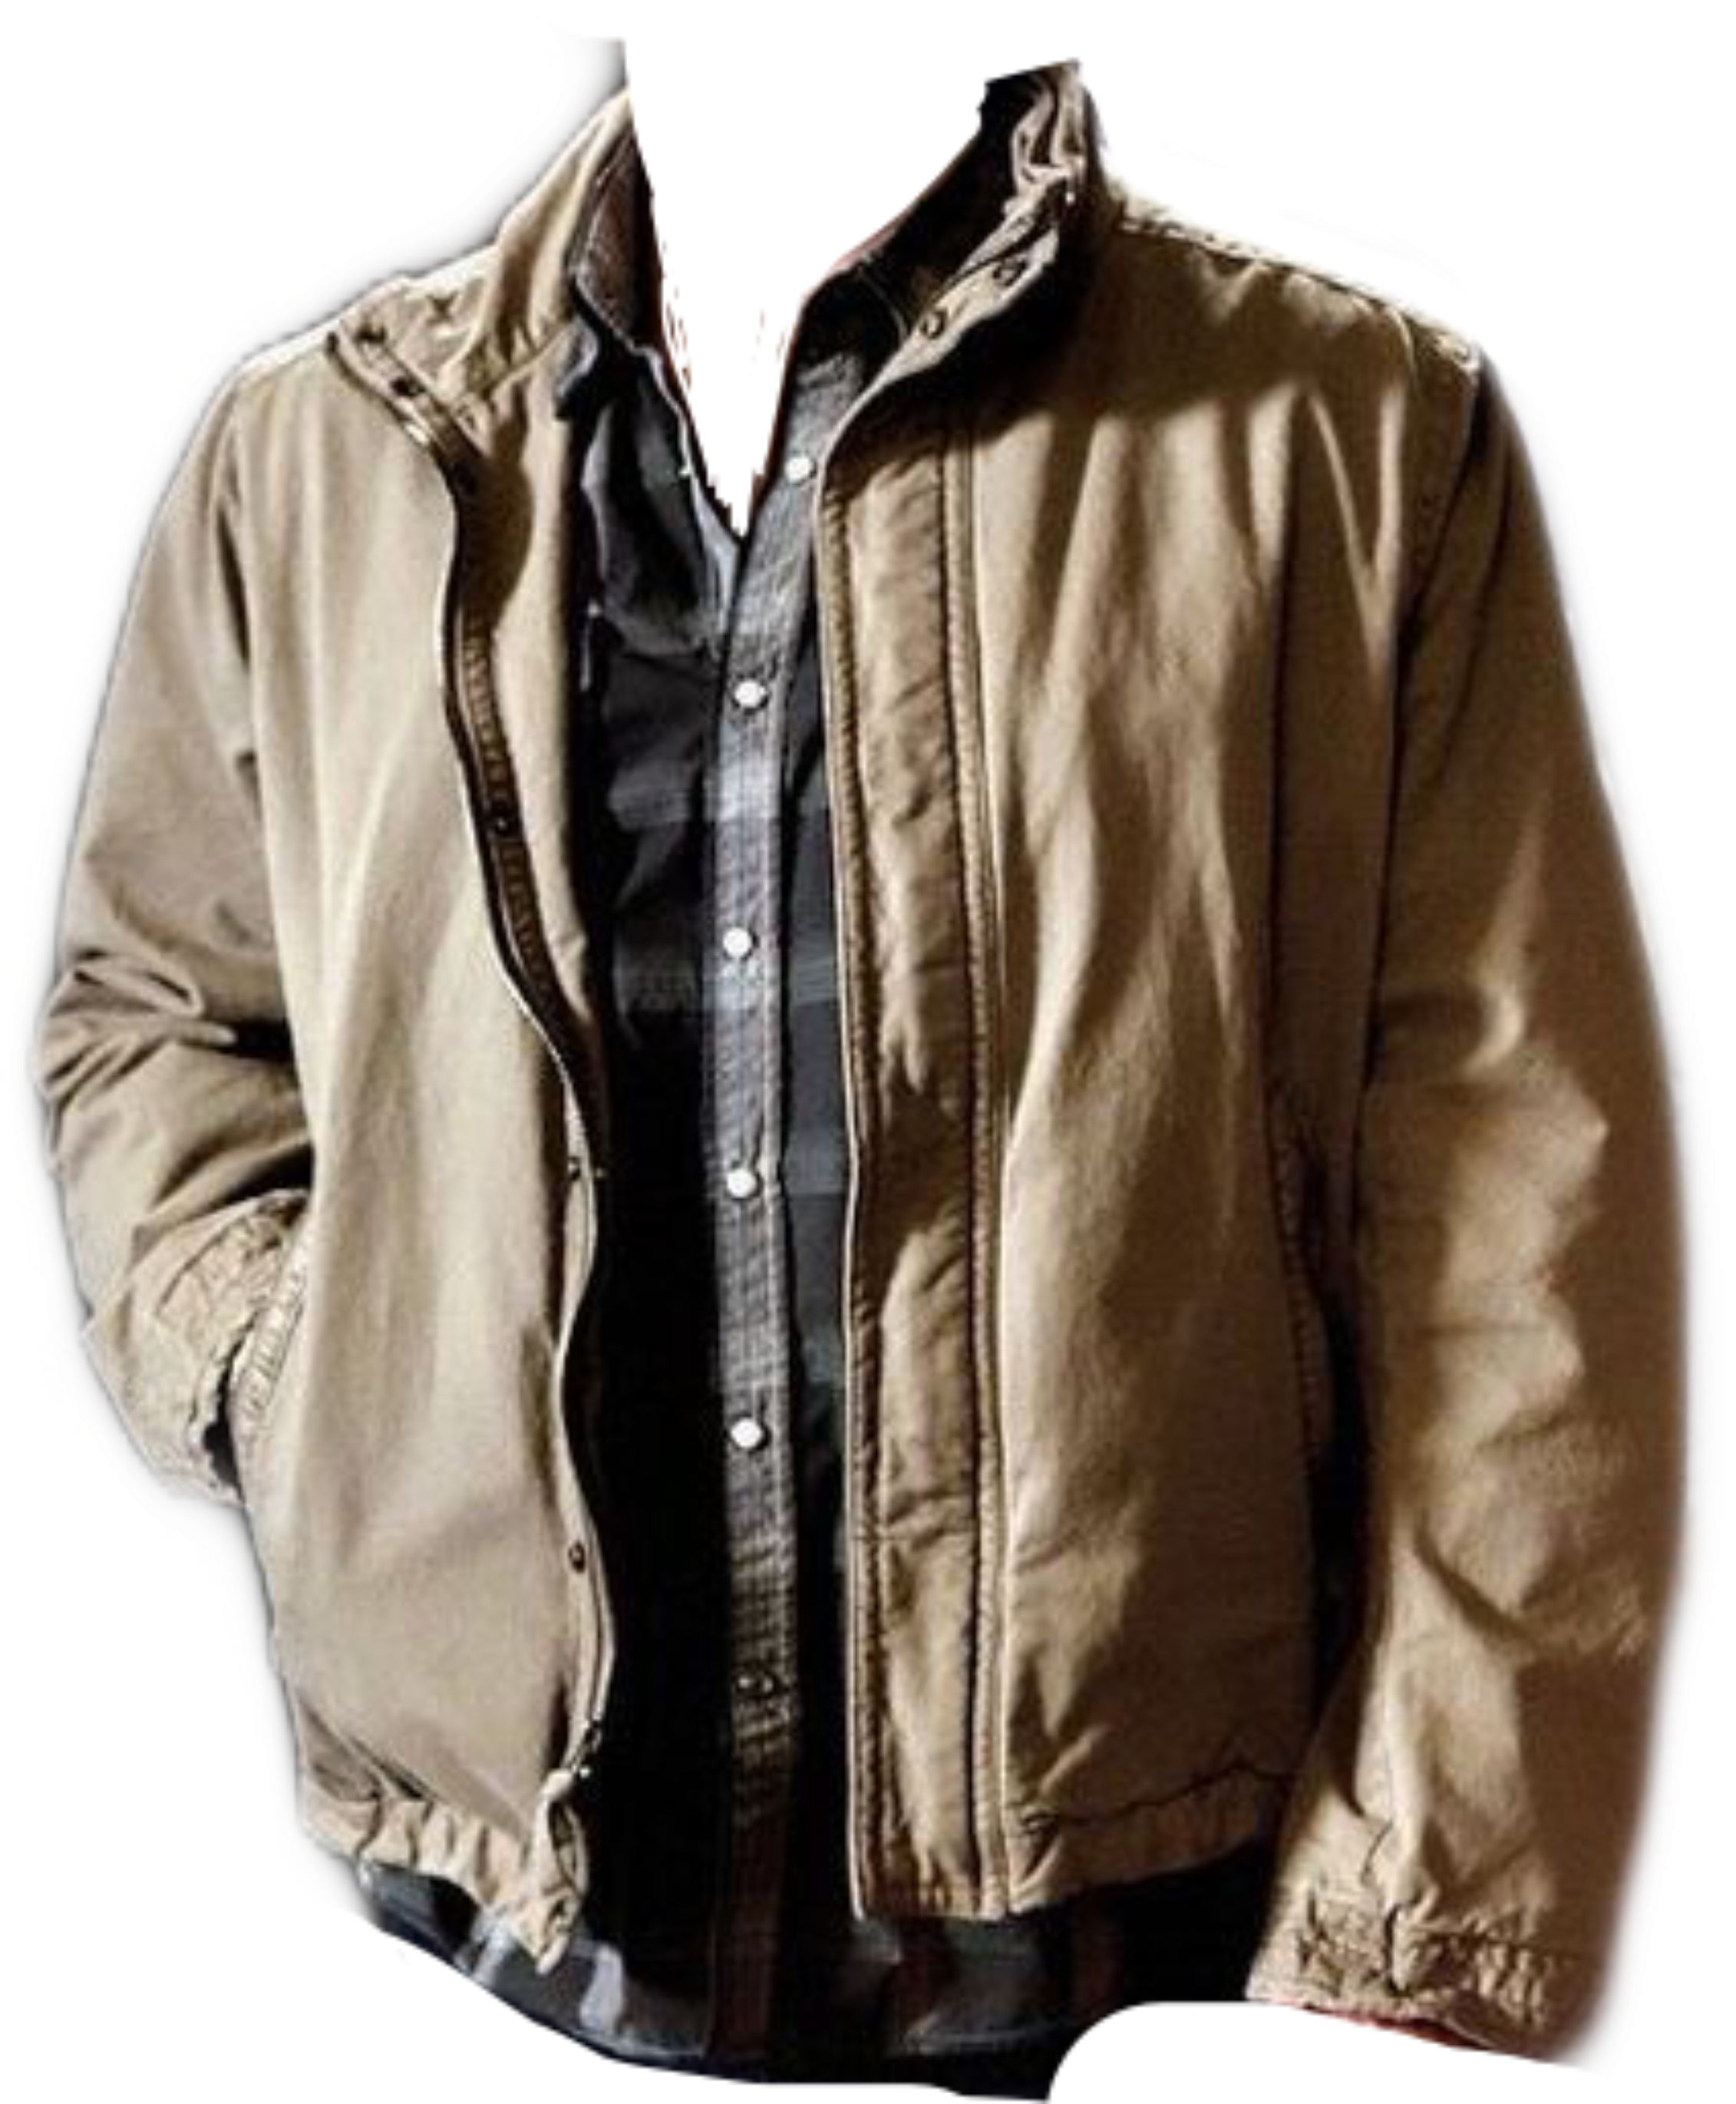 A Person Wearing A Jacket